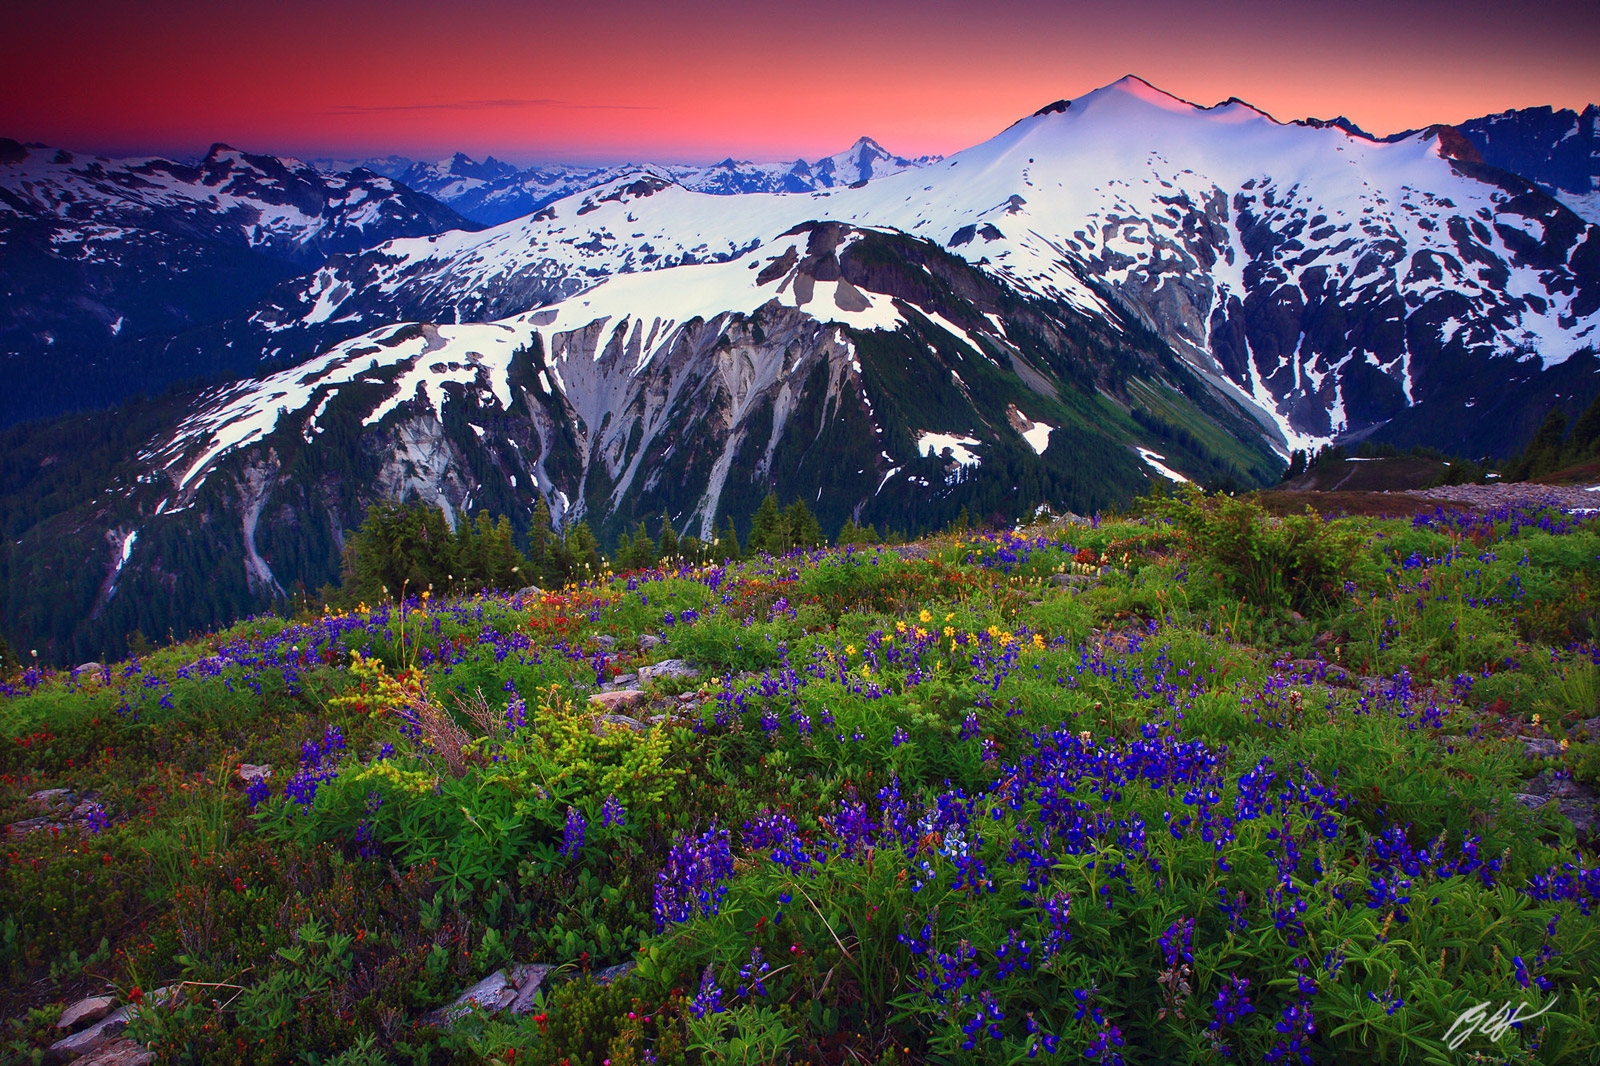 Sunset Wildflowers and Mt Ruth from Hannagan Peak in North Cascades National Park in Washington